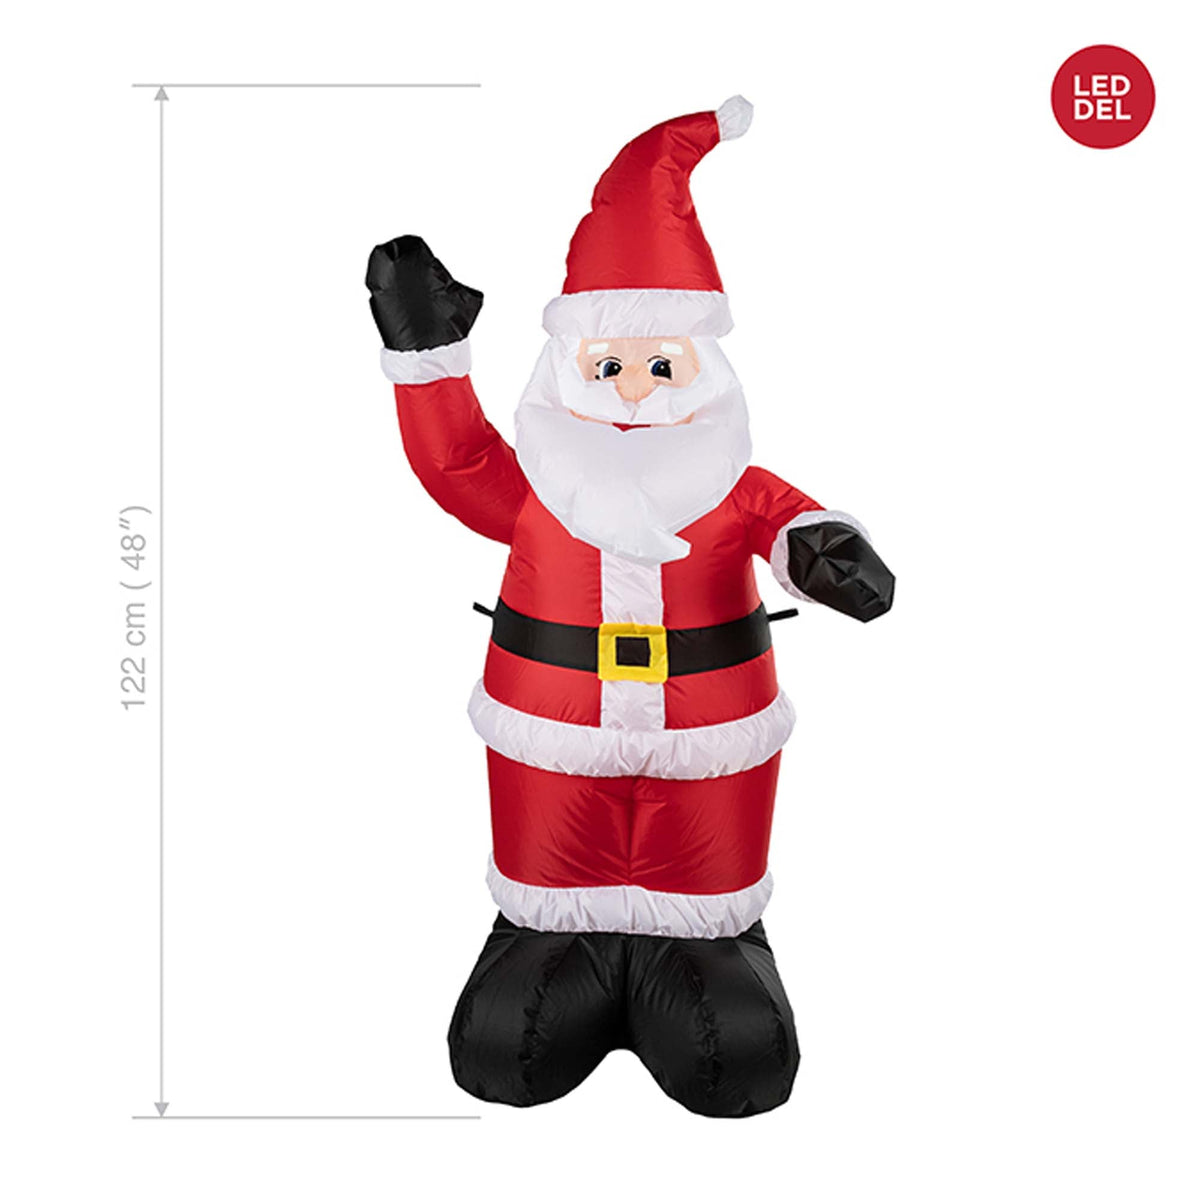 DANSON DECOR Christmas Light-Up Waving Inflatable Santa, 48 Inches, 1 Count